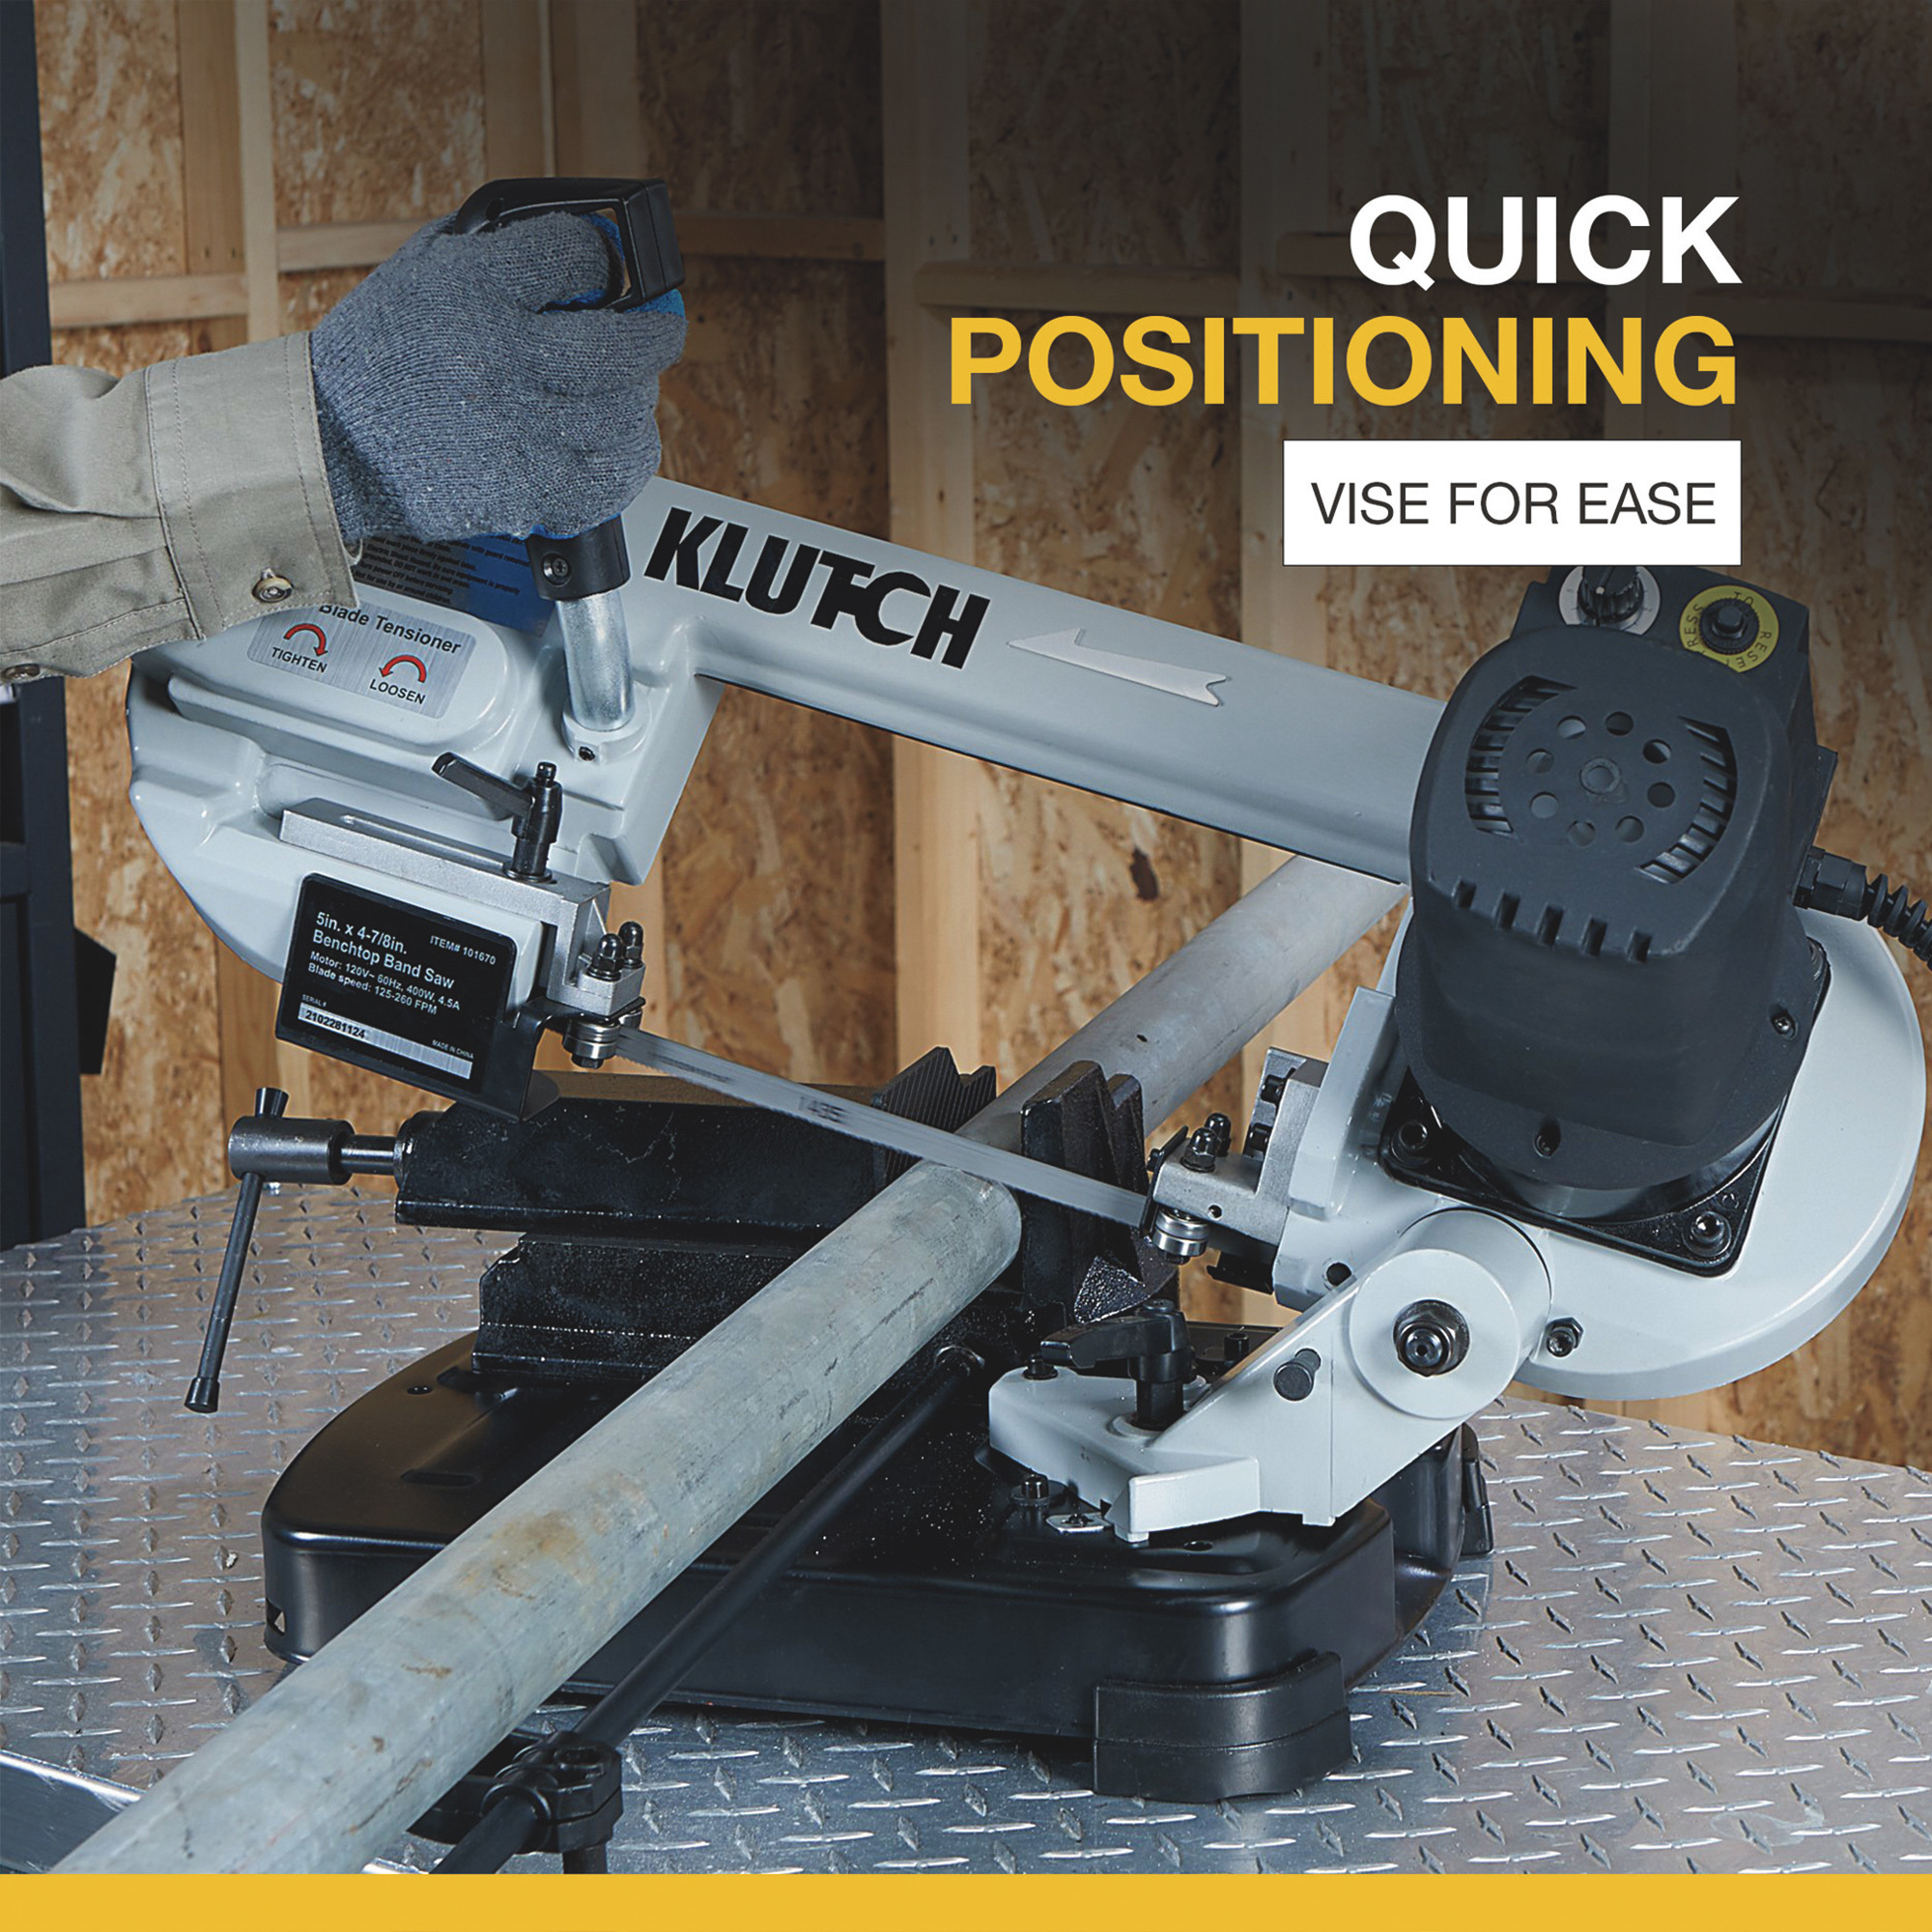 Klutch Benchtop Metal Cutting Band Saw — 5in. x 7/8in., 400 Watts, 110– 120V Northern Tool